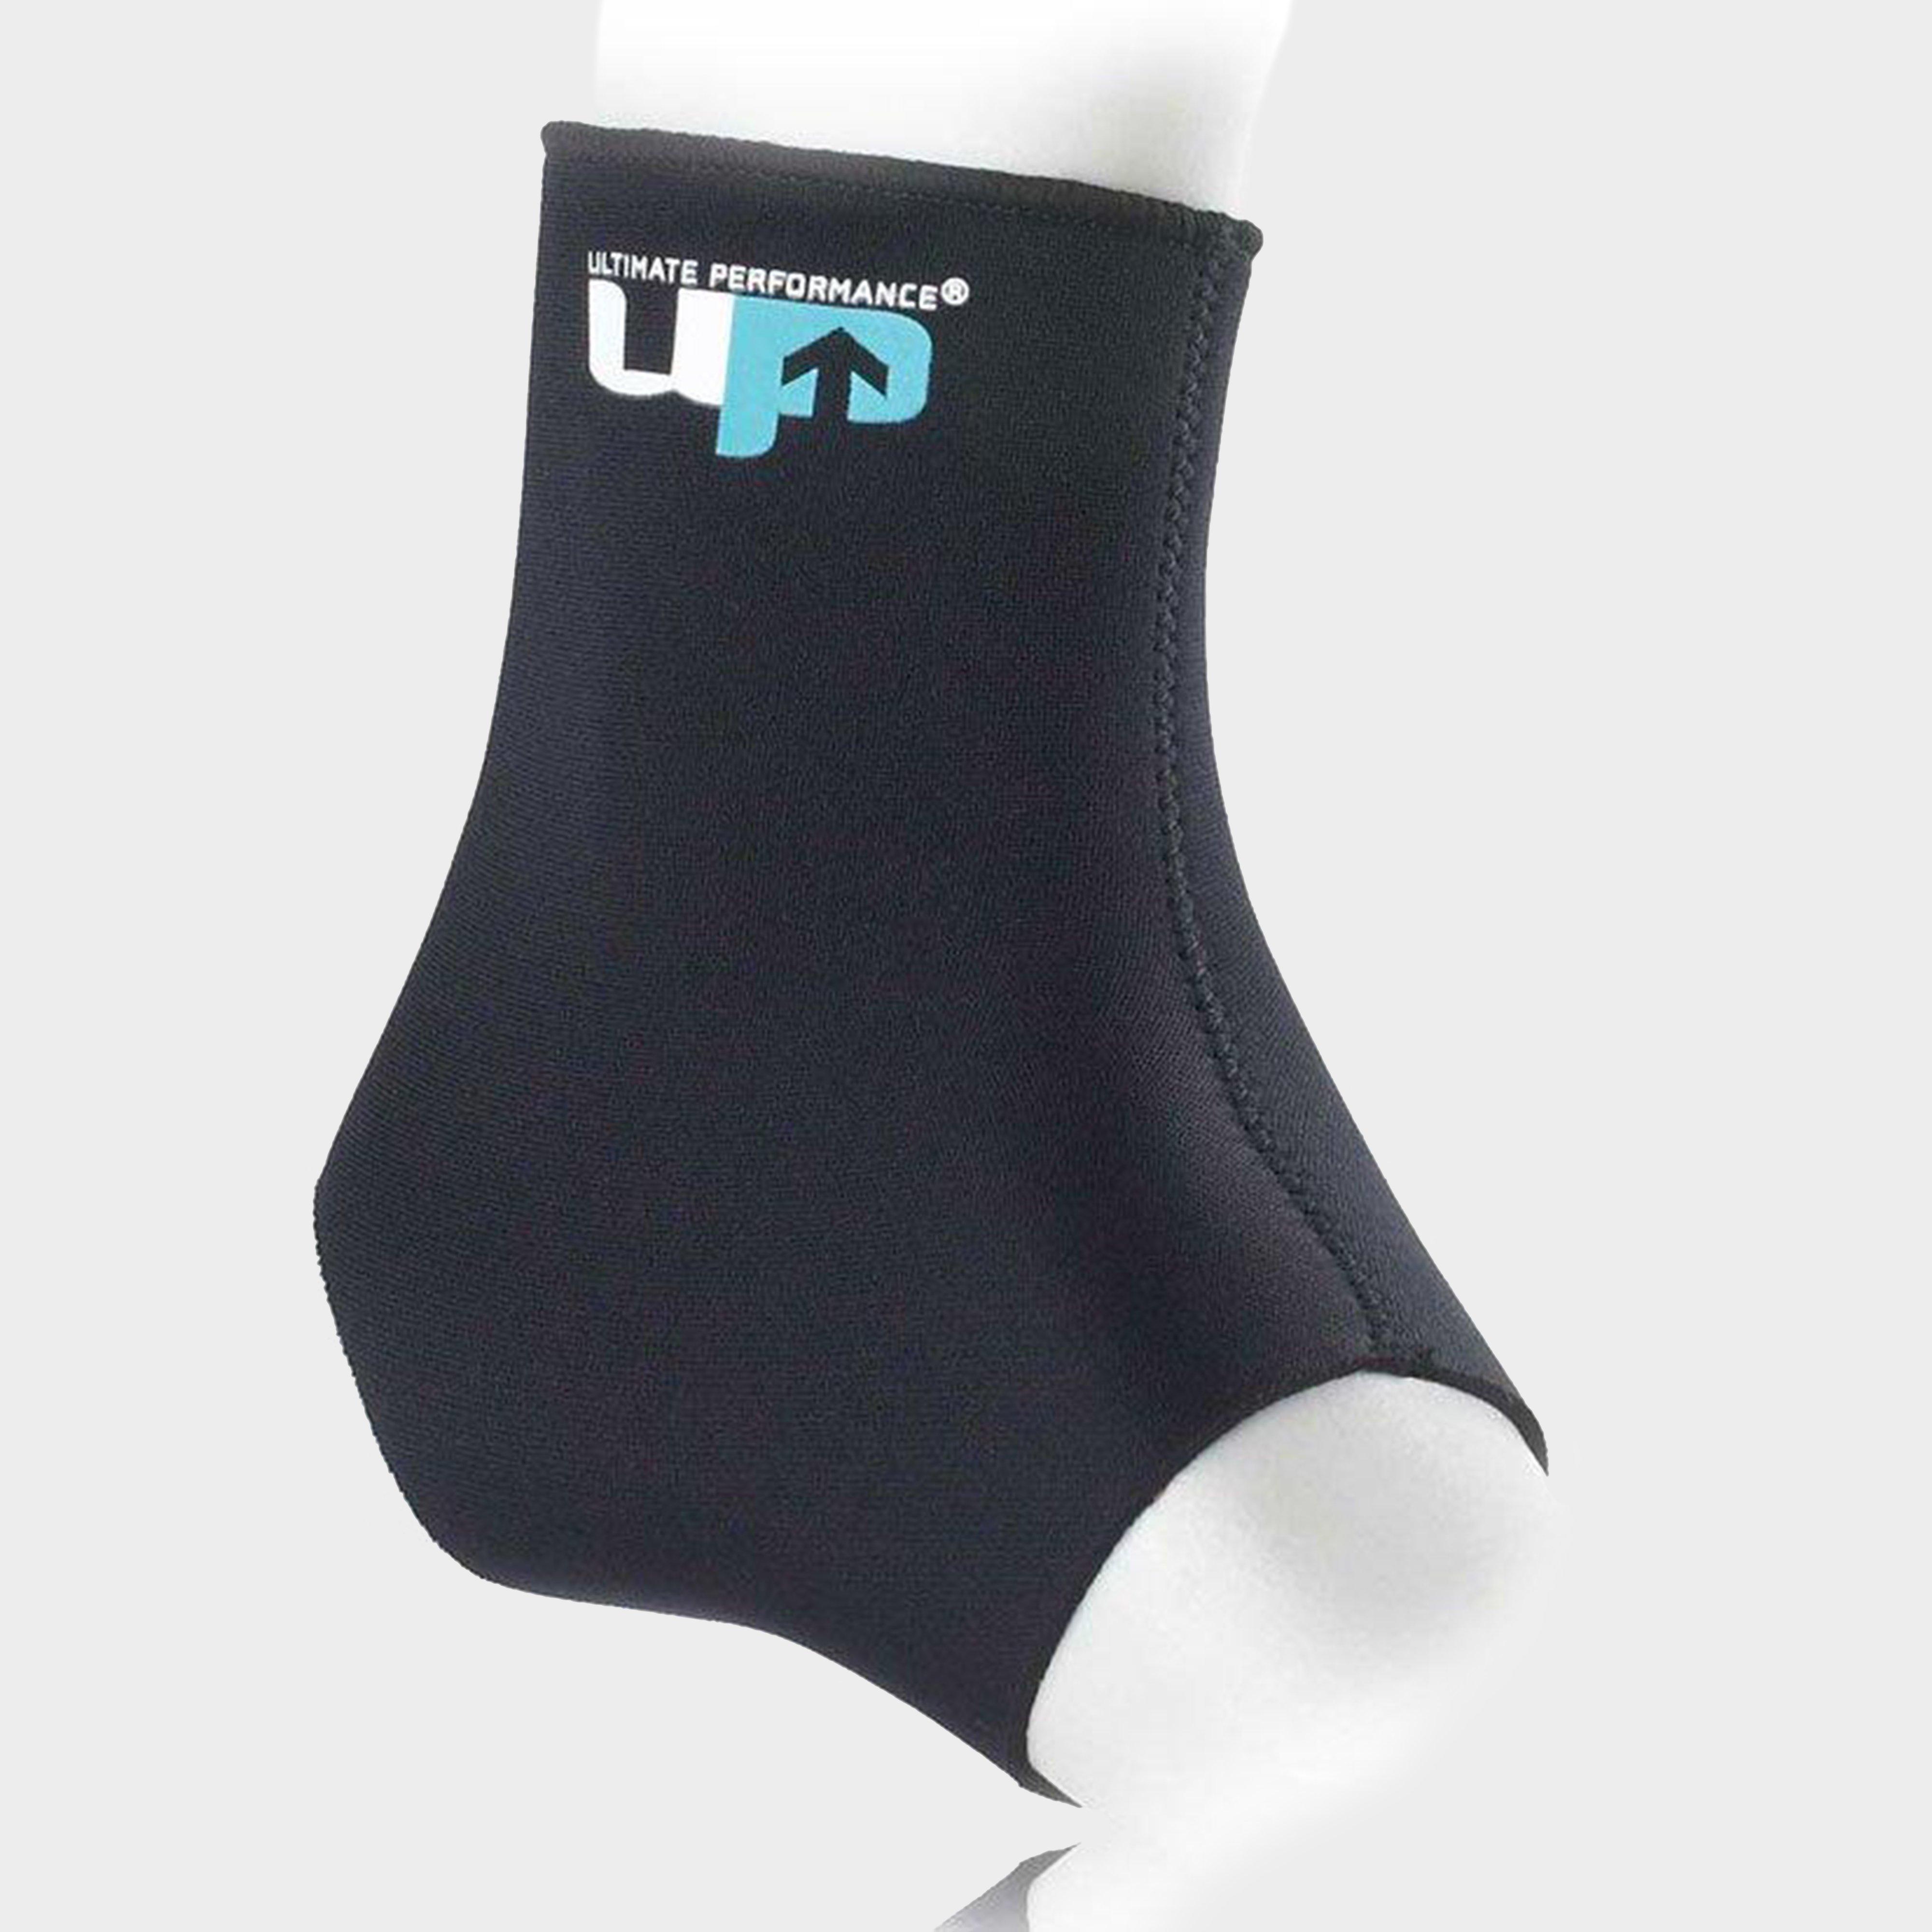 Image of Ultimate Performance Neoprene Ankle - Black/Support, Black/SUPPORT